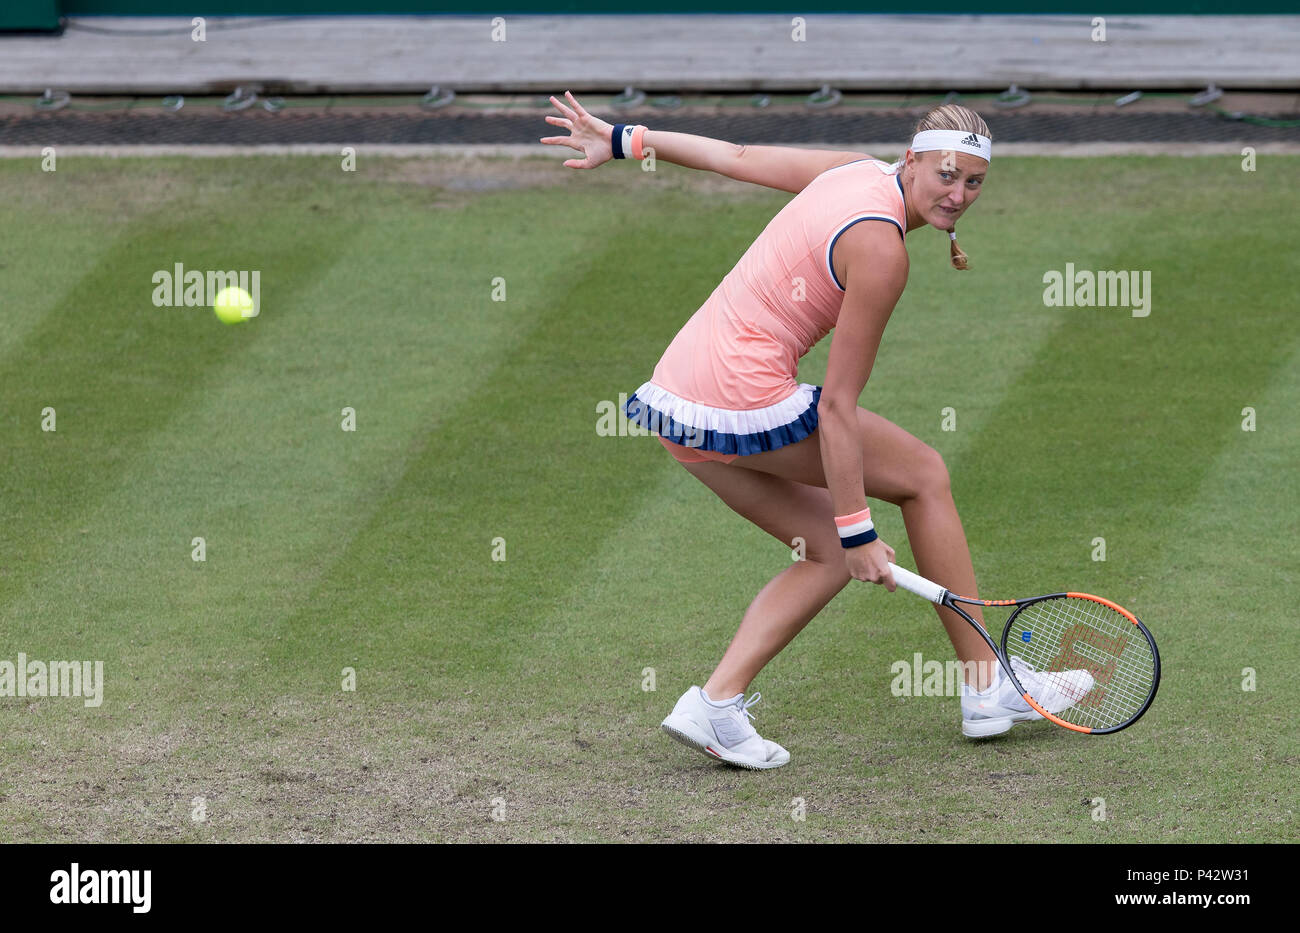 Birmingham, UK. 20th June 2018. Kristina Mladenovic of France in action against Magdalena Rybarikova of Slovakia during the Nature Valley Classic WTA Tour event at Edgbaston Priory Club, Birmingham, UK on Wednesday 20th June 2018. Credit: James Wilson/Alamy Live News Stock Photo